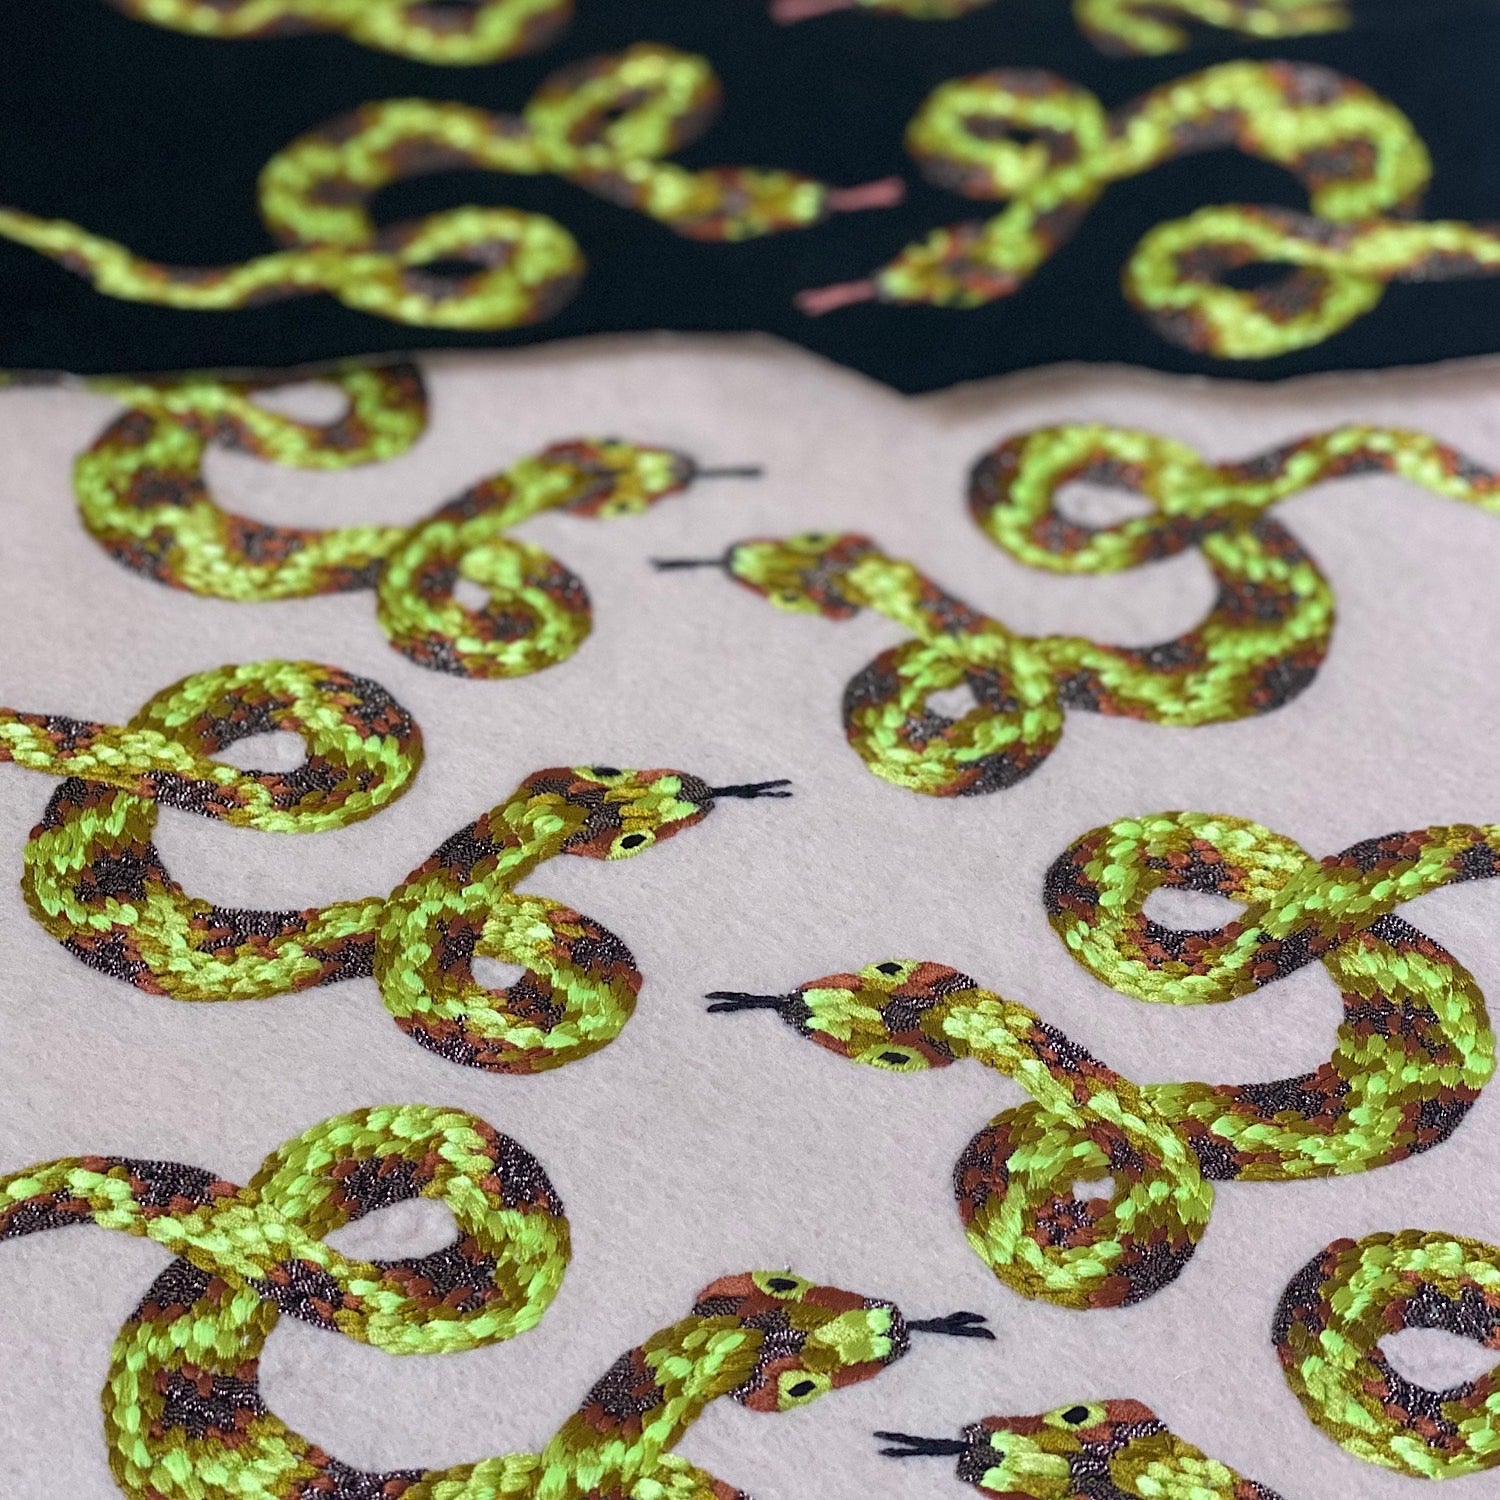 A number of uncut embroidered snake patches, some on black felt and some on cream felt